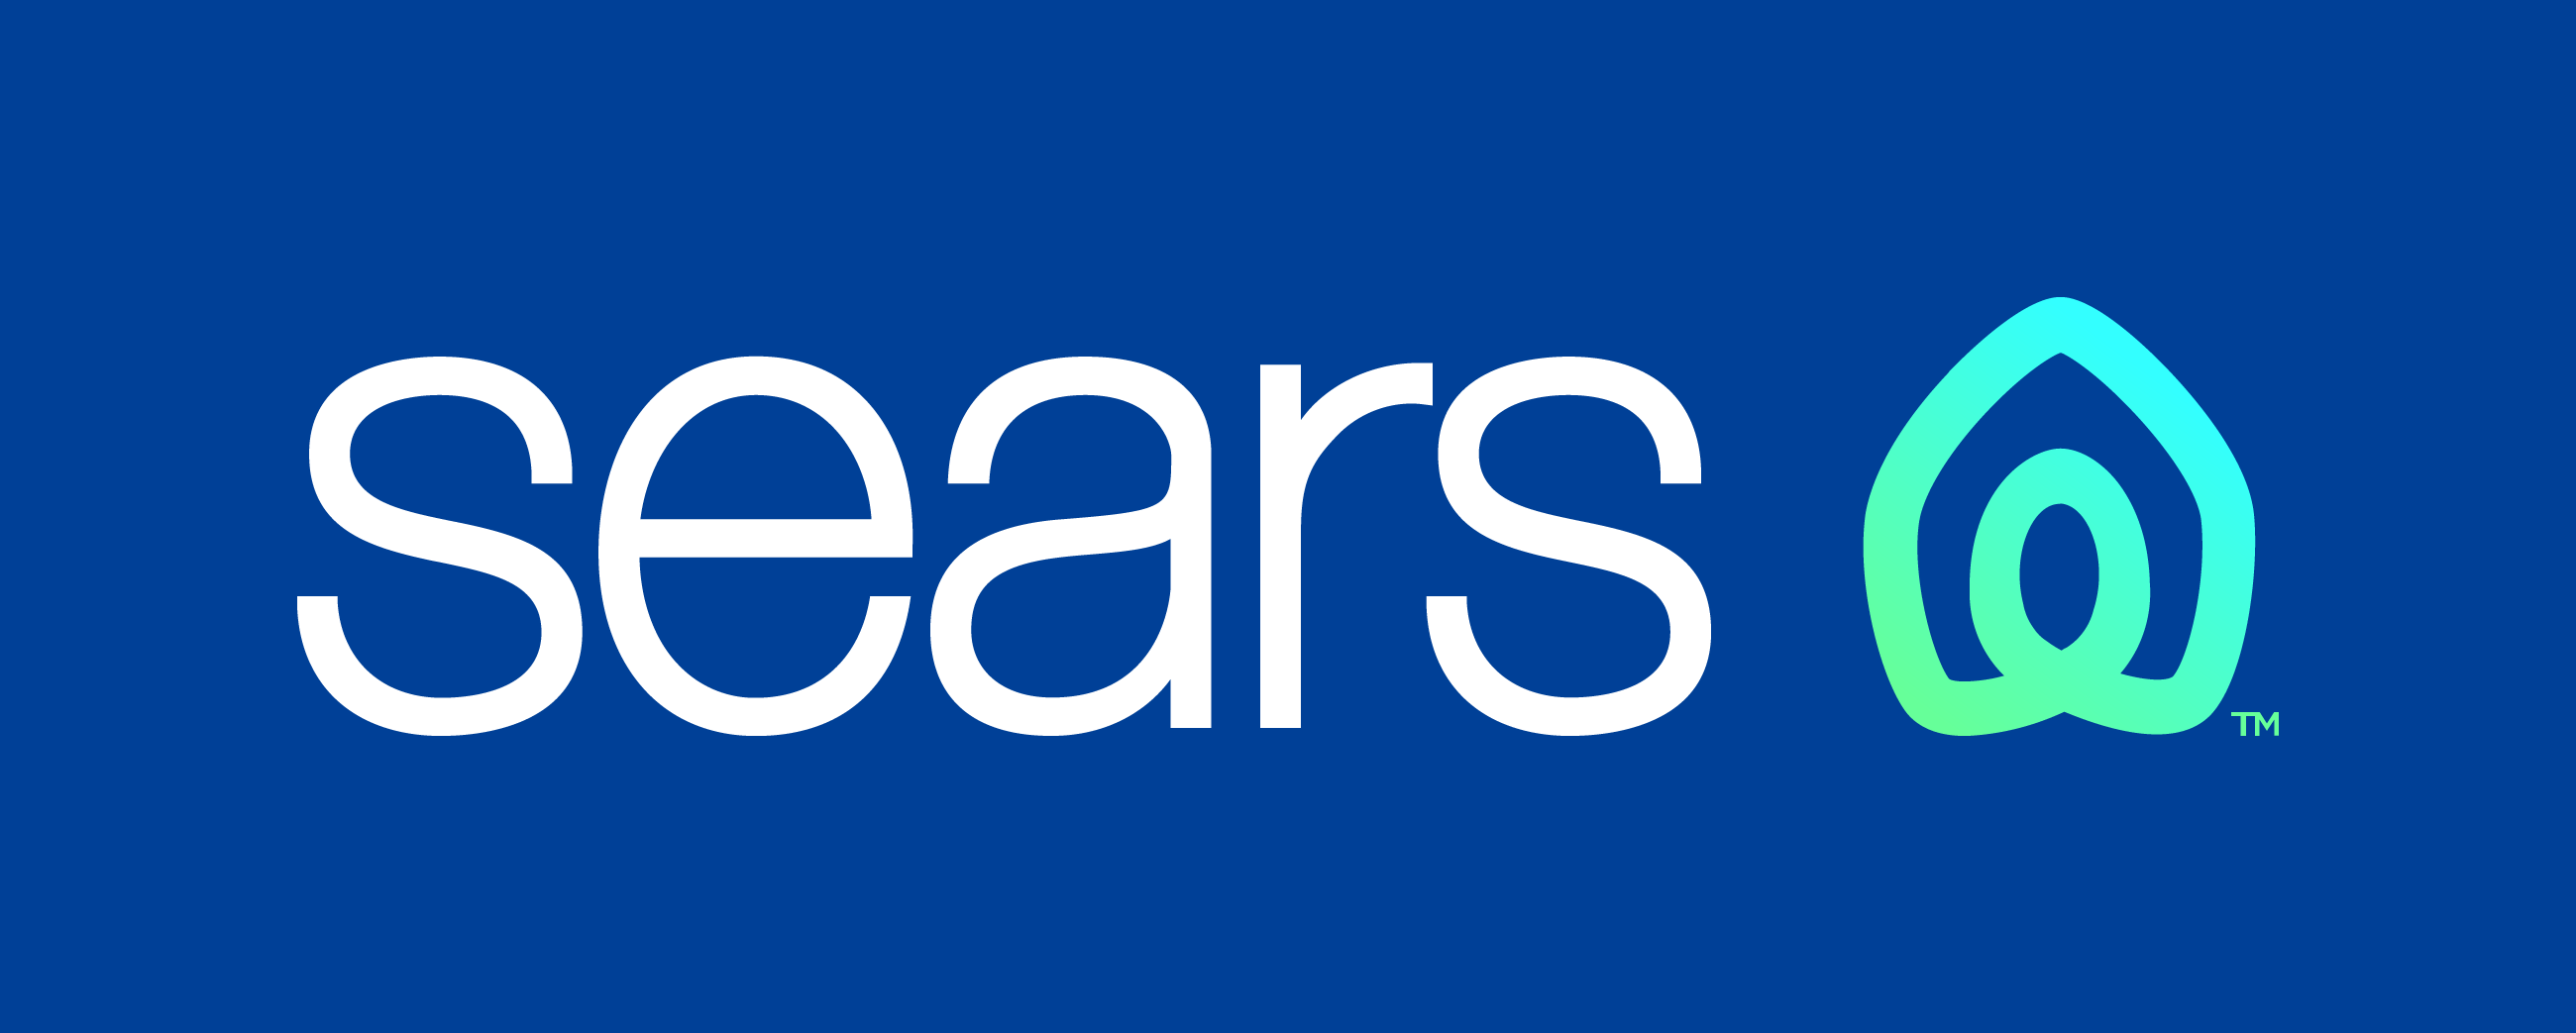 New Logo for Sears